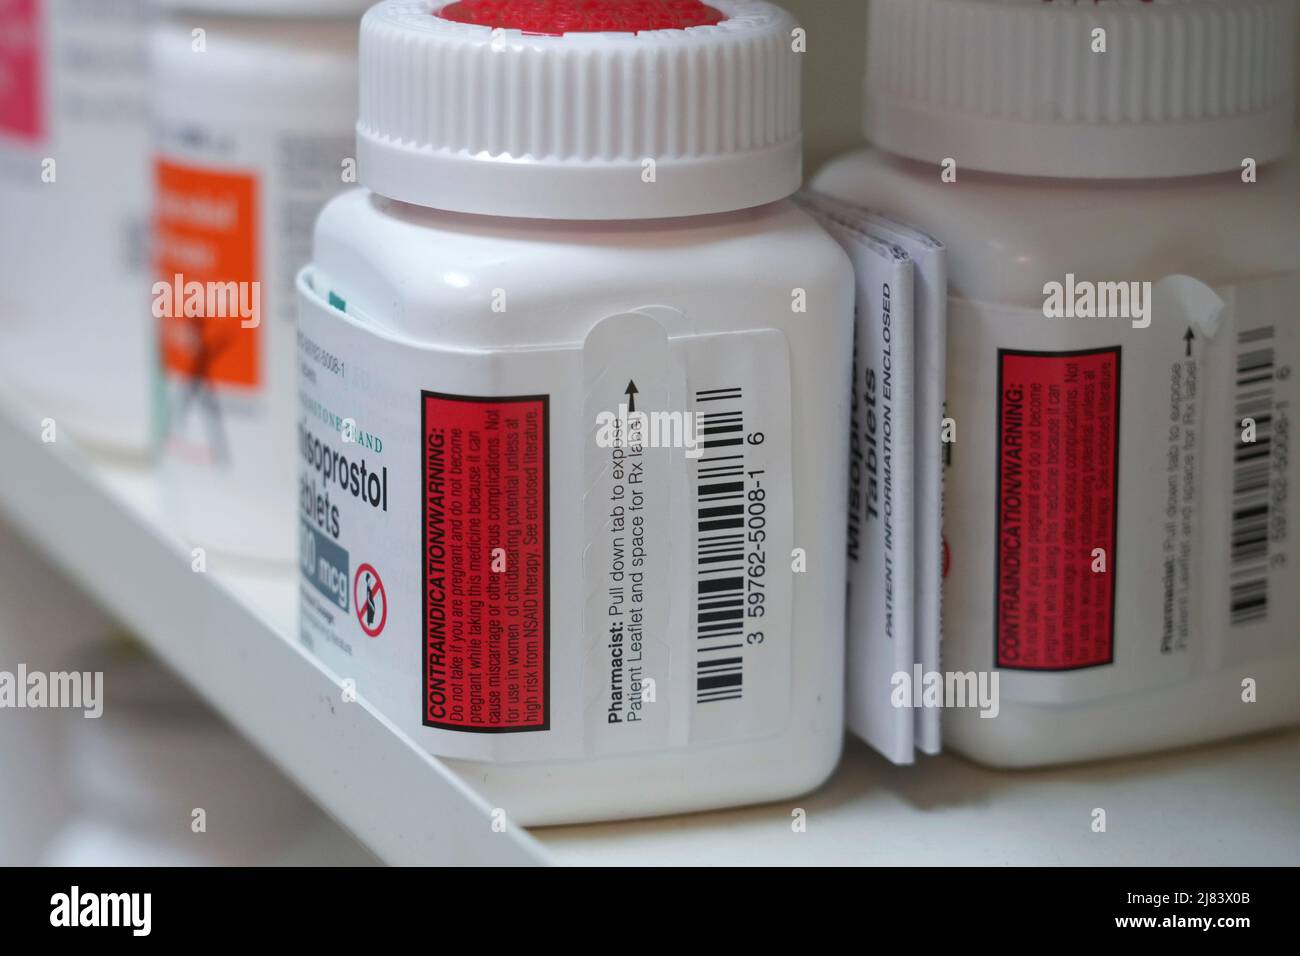 Bottles of Misoprostol, used to terminate early pregnancies, are displayed in a pharmacy in Provo, Utah, U.S. May 12, 2022. REUTERS/George Frey Stock Photo